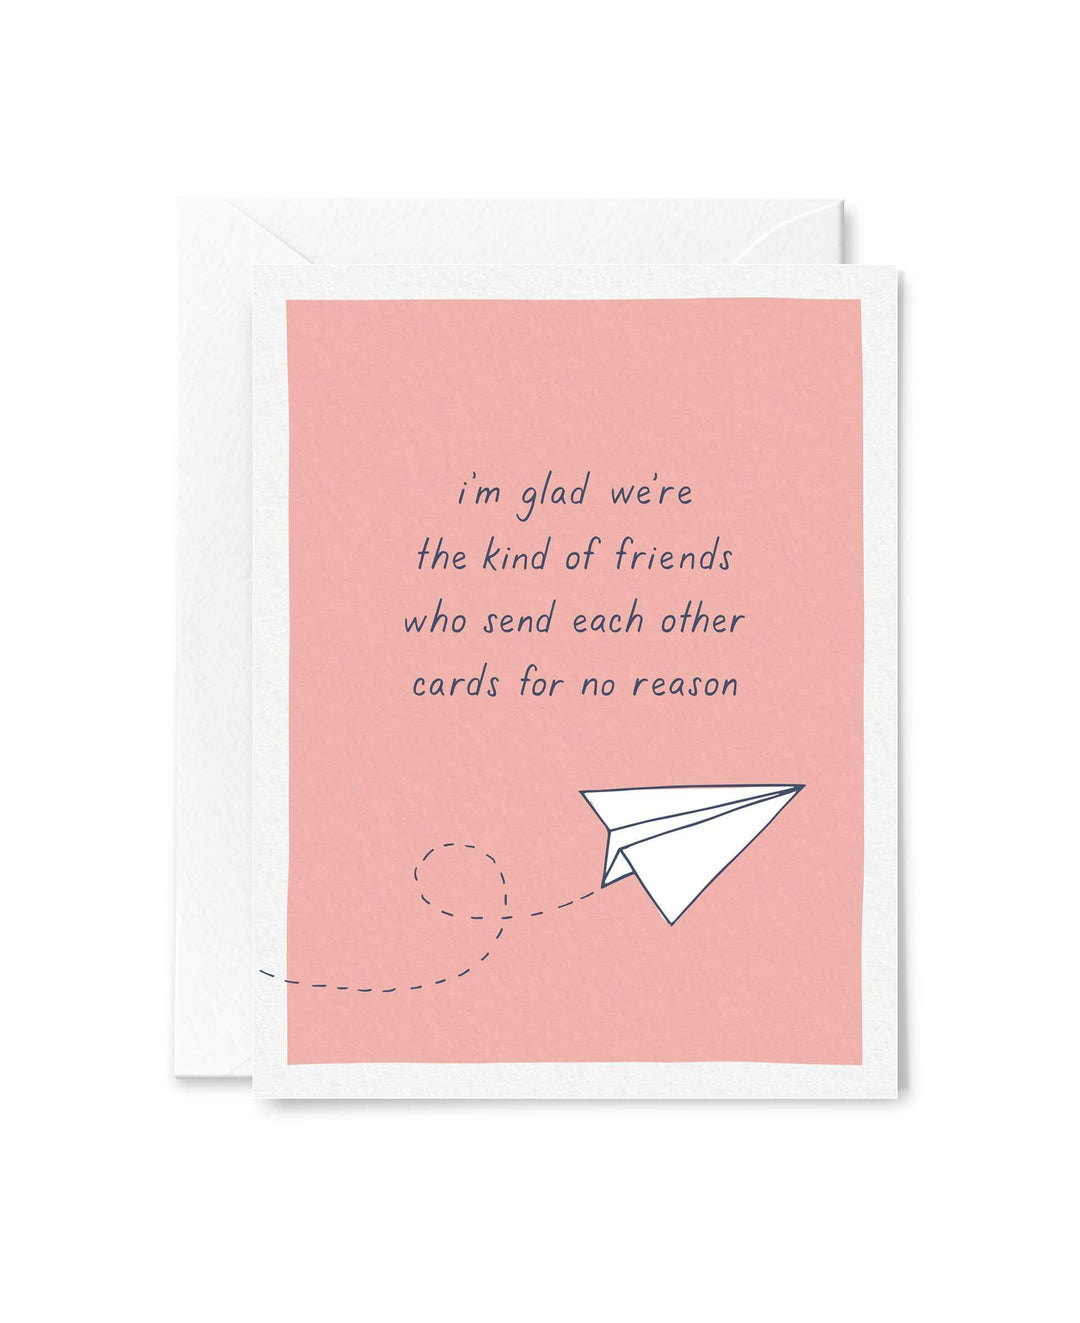 Tiny Hooray Card Send Each Other Cards for No Reason Card